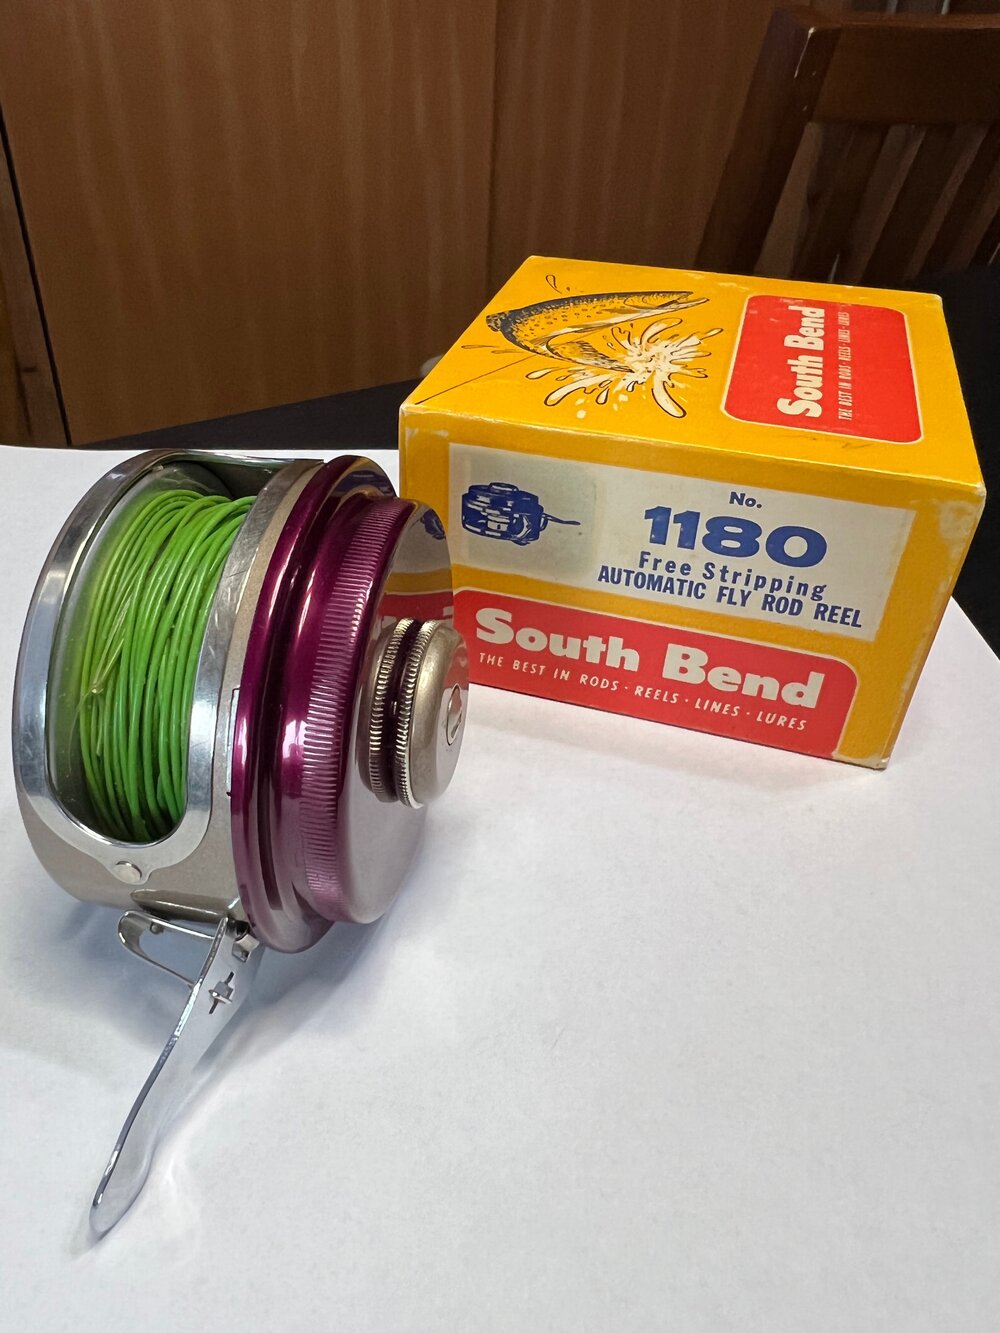 South Bend Auto-Matic Fly Rod Reel No. 1180 with original Box &  Instructions Circa -1942 — VINTAGE FISHING REELS